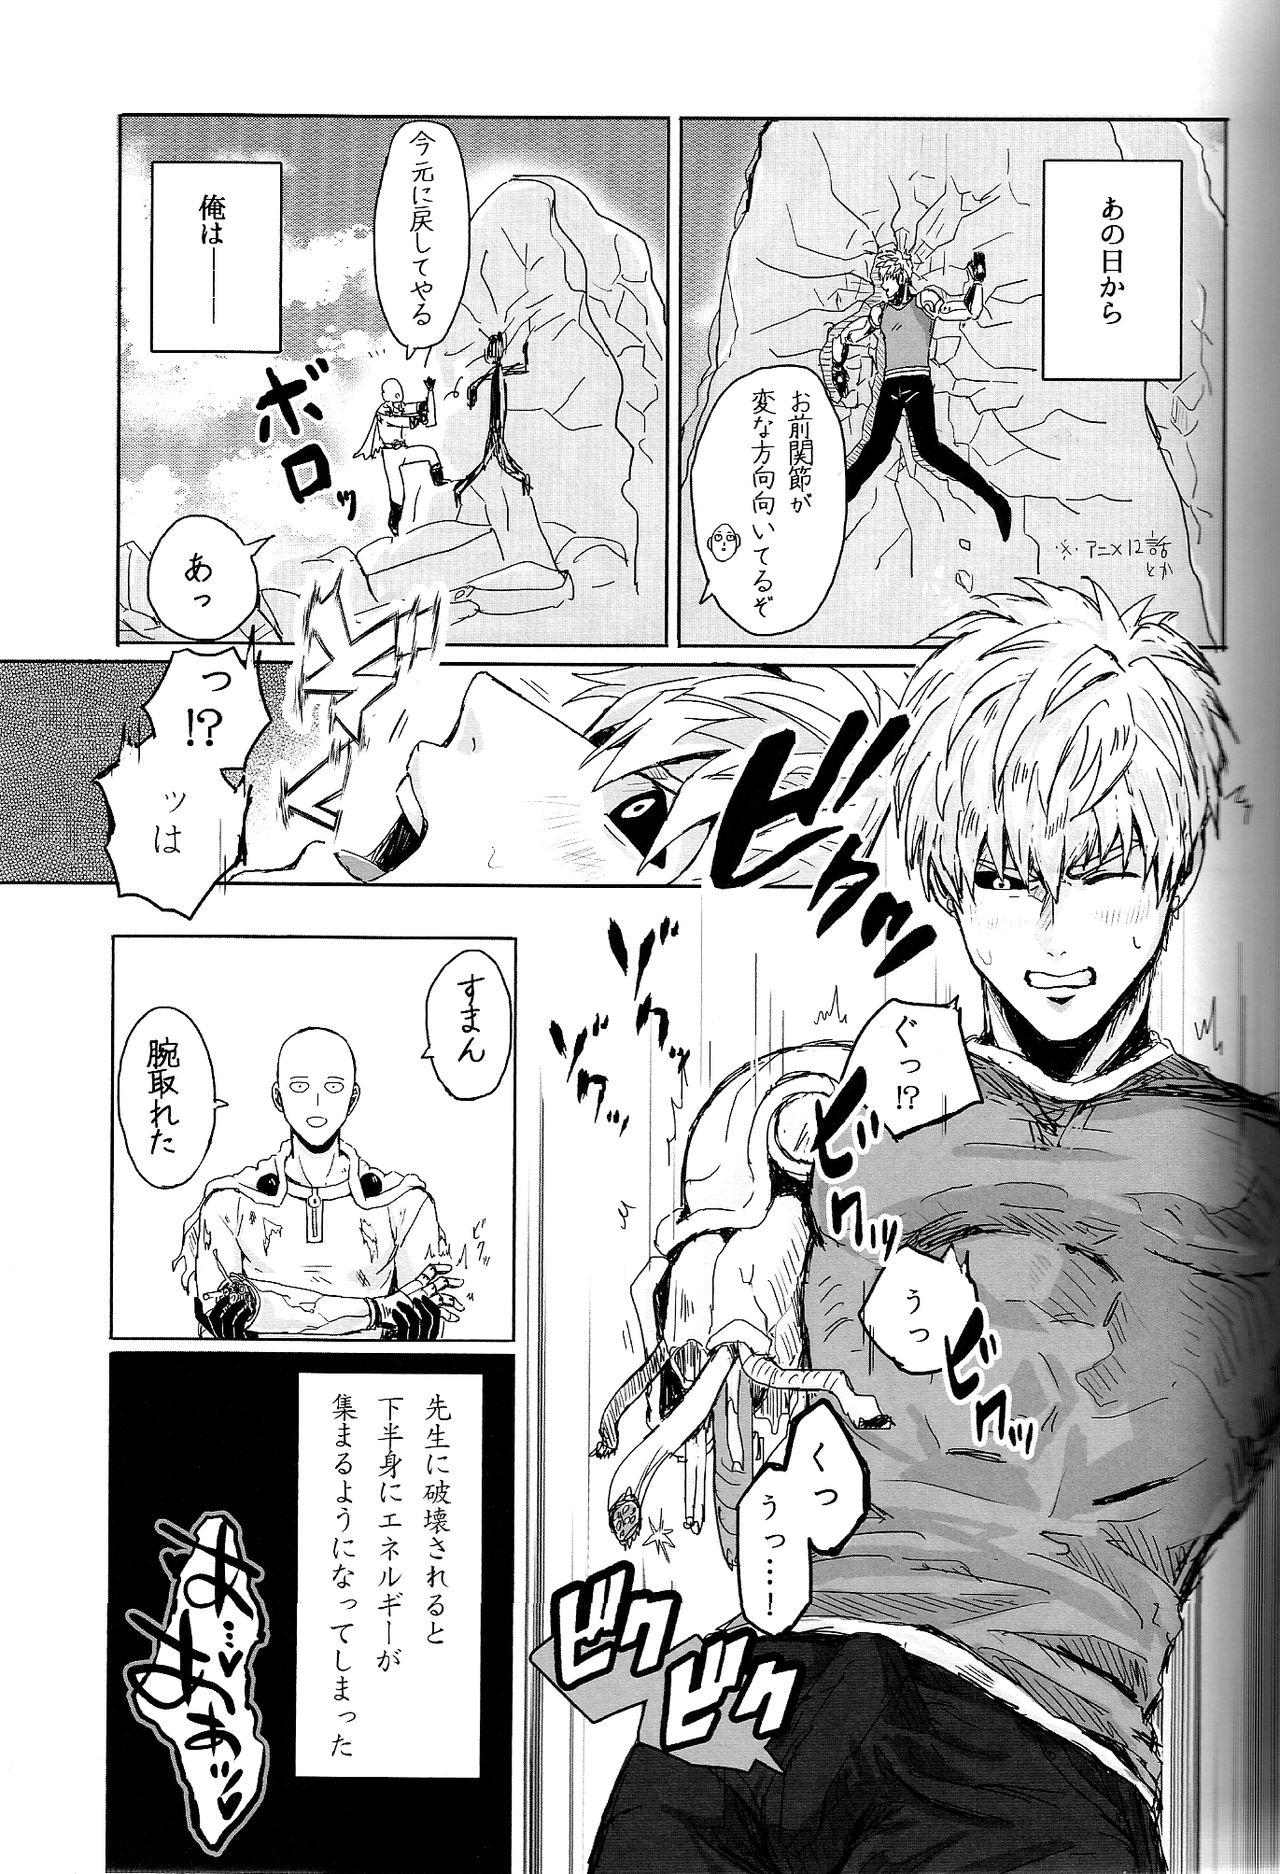 Cock Suck Ganbou Destroy - One punch man Classy - Page 3